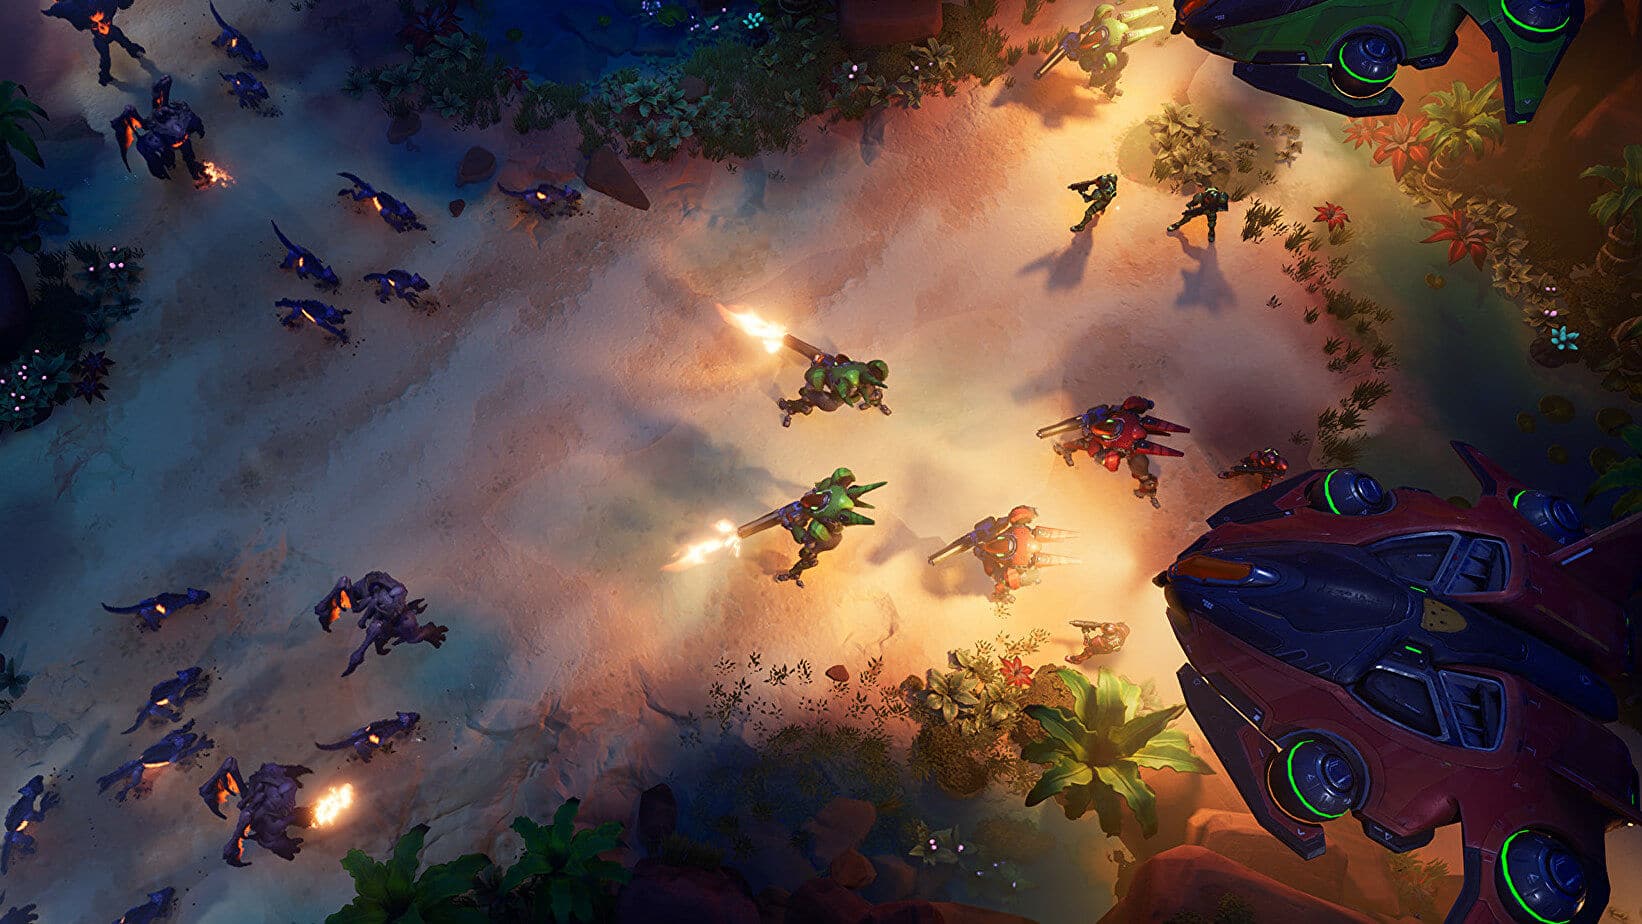 Former Blizzard folks announce free-to-play RTS Stormgate